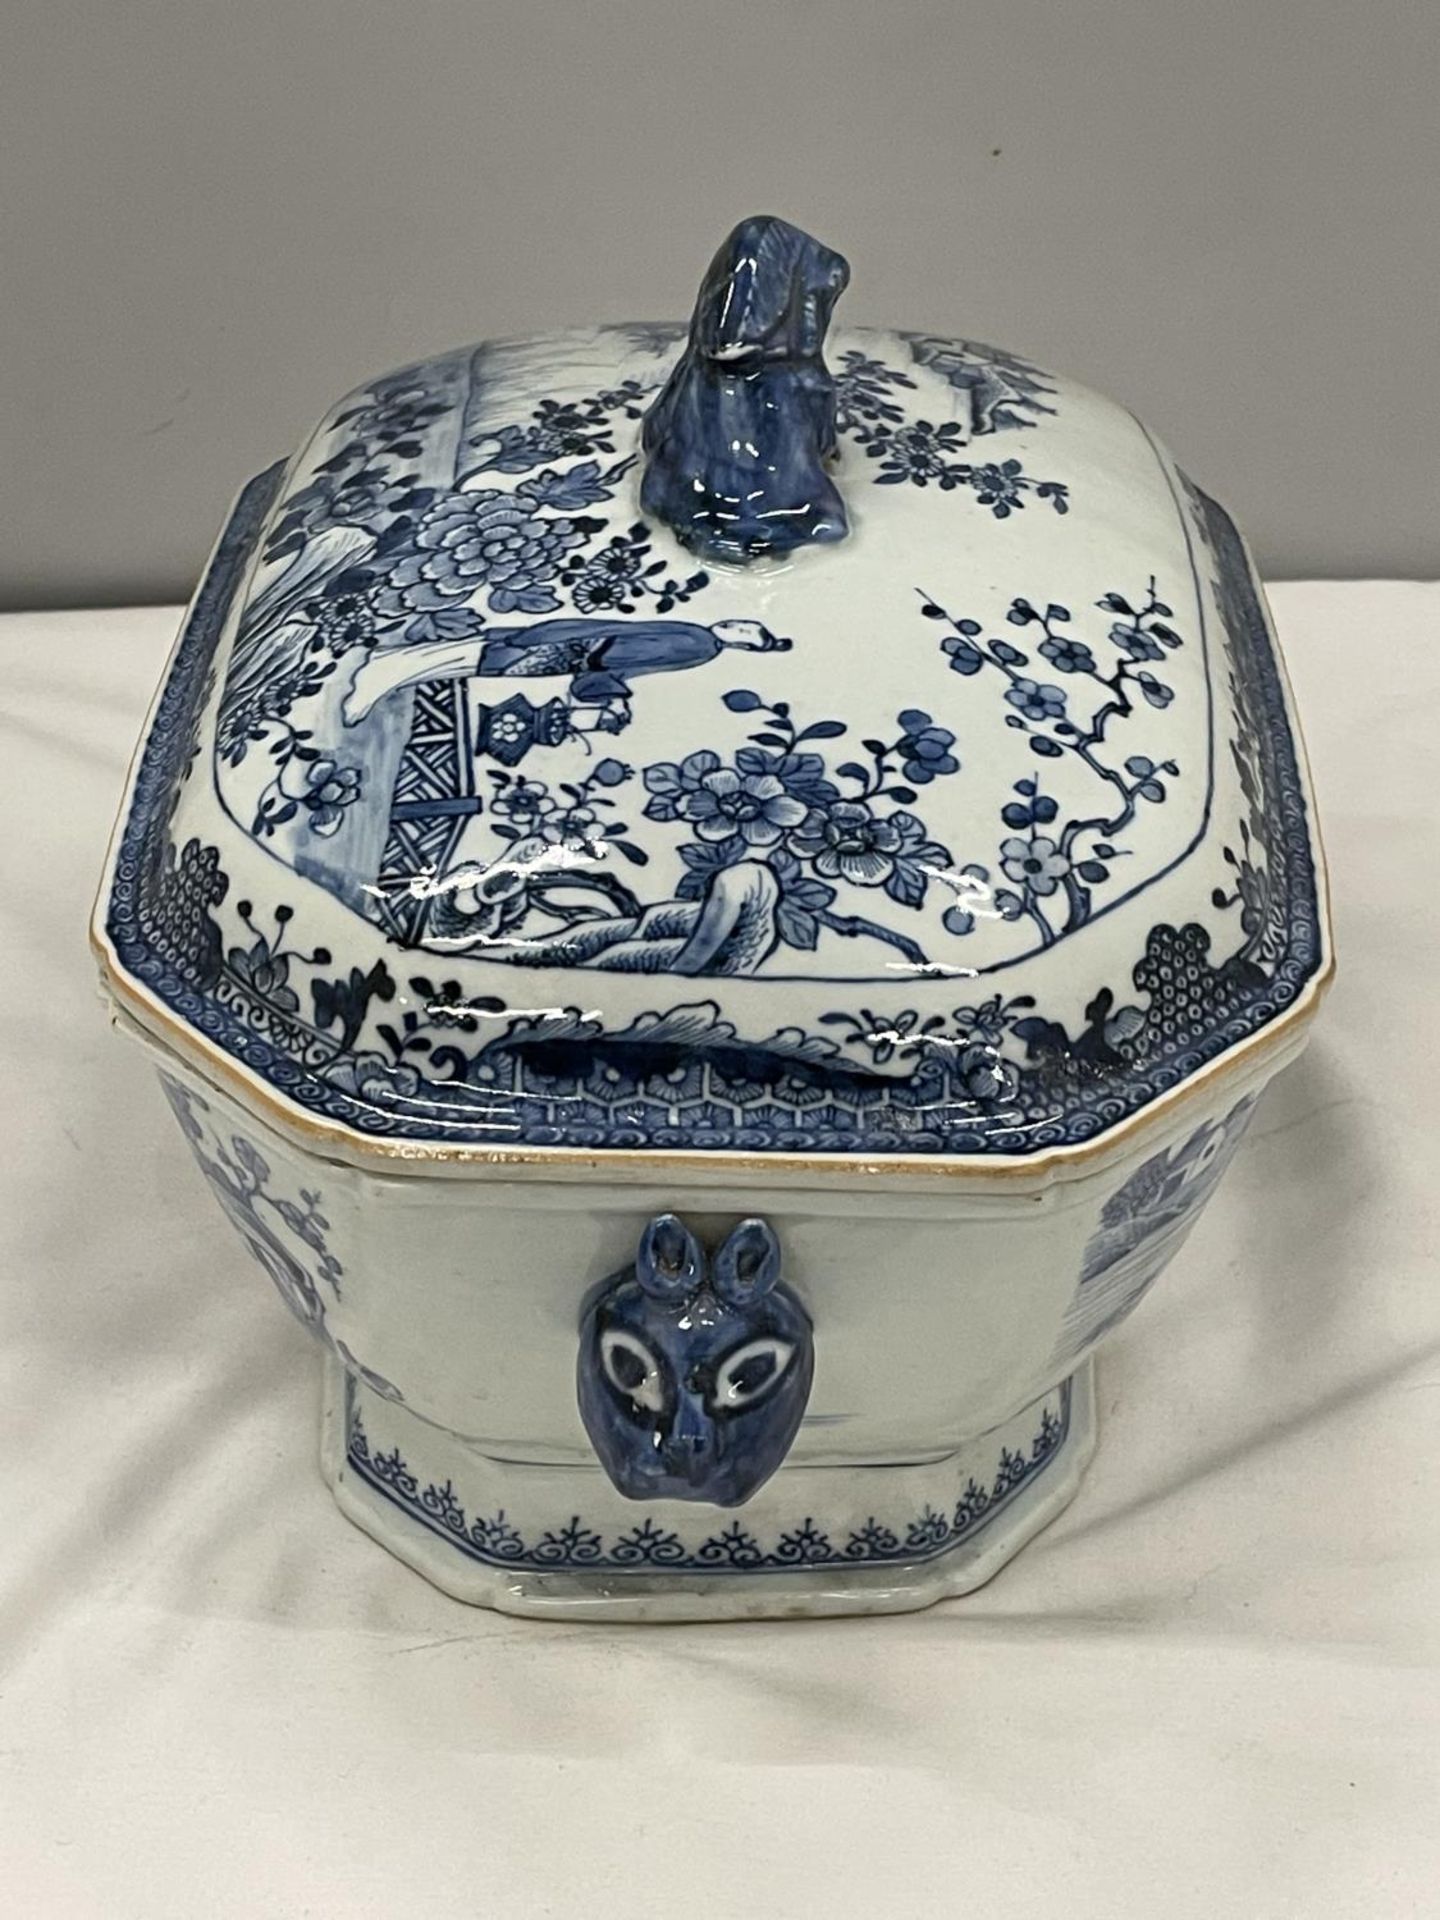 A BELIEVED TO BE LATE 18TH/EARLY 19TH CENTURY CHINESE QING DYNASTY/NANKIN BLUE AND WHITE LARGE - Image 5 of 9